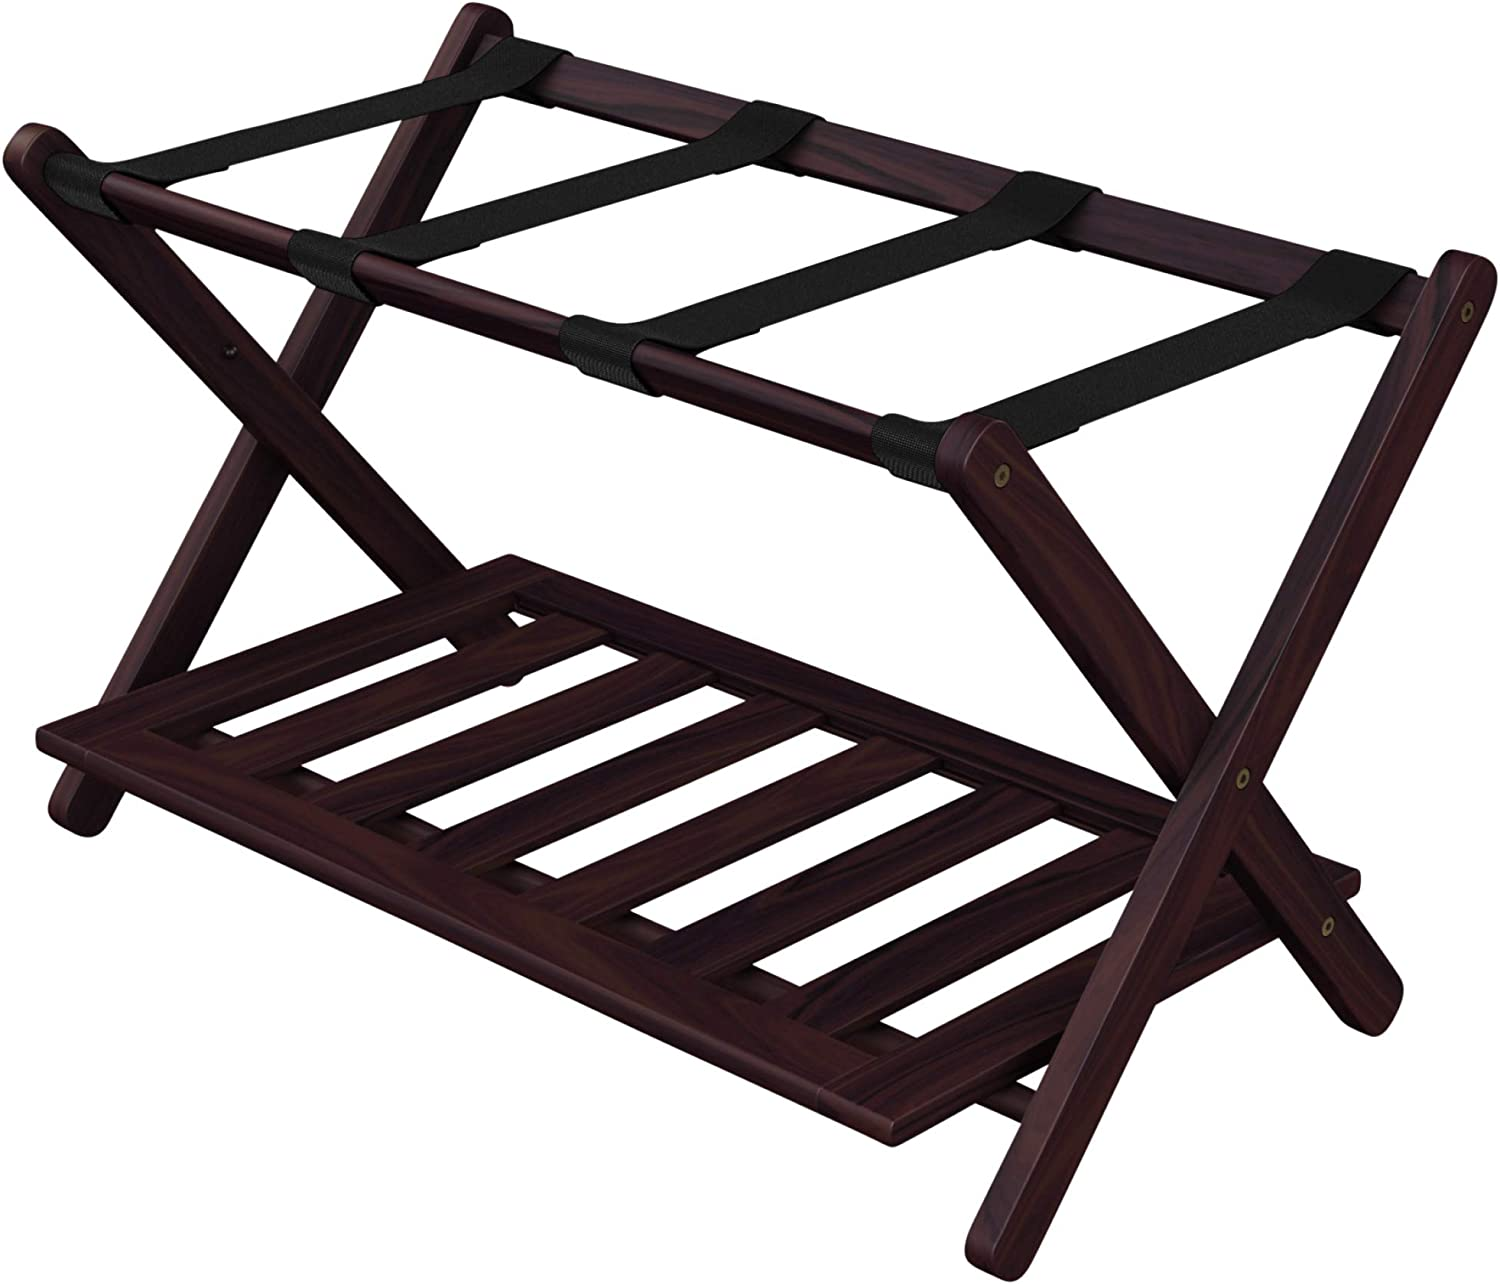 Stony Edge folding luggage rack for guest room Perfect sized 26.75”x16”x22.25” with Extra Shelf Storage - Suitable for Luggage, Suitcase and Shoes (NATURAL)